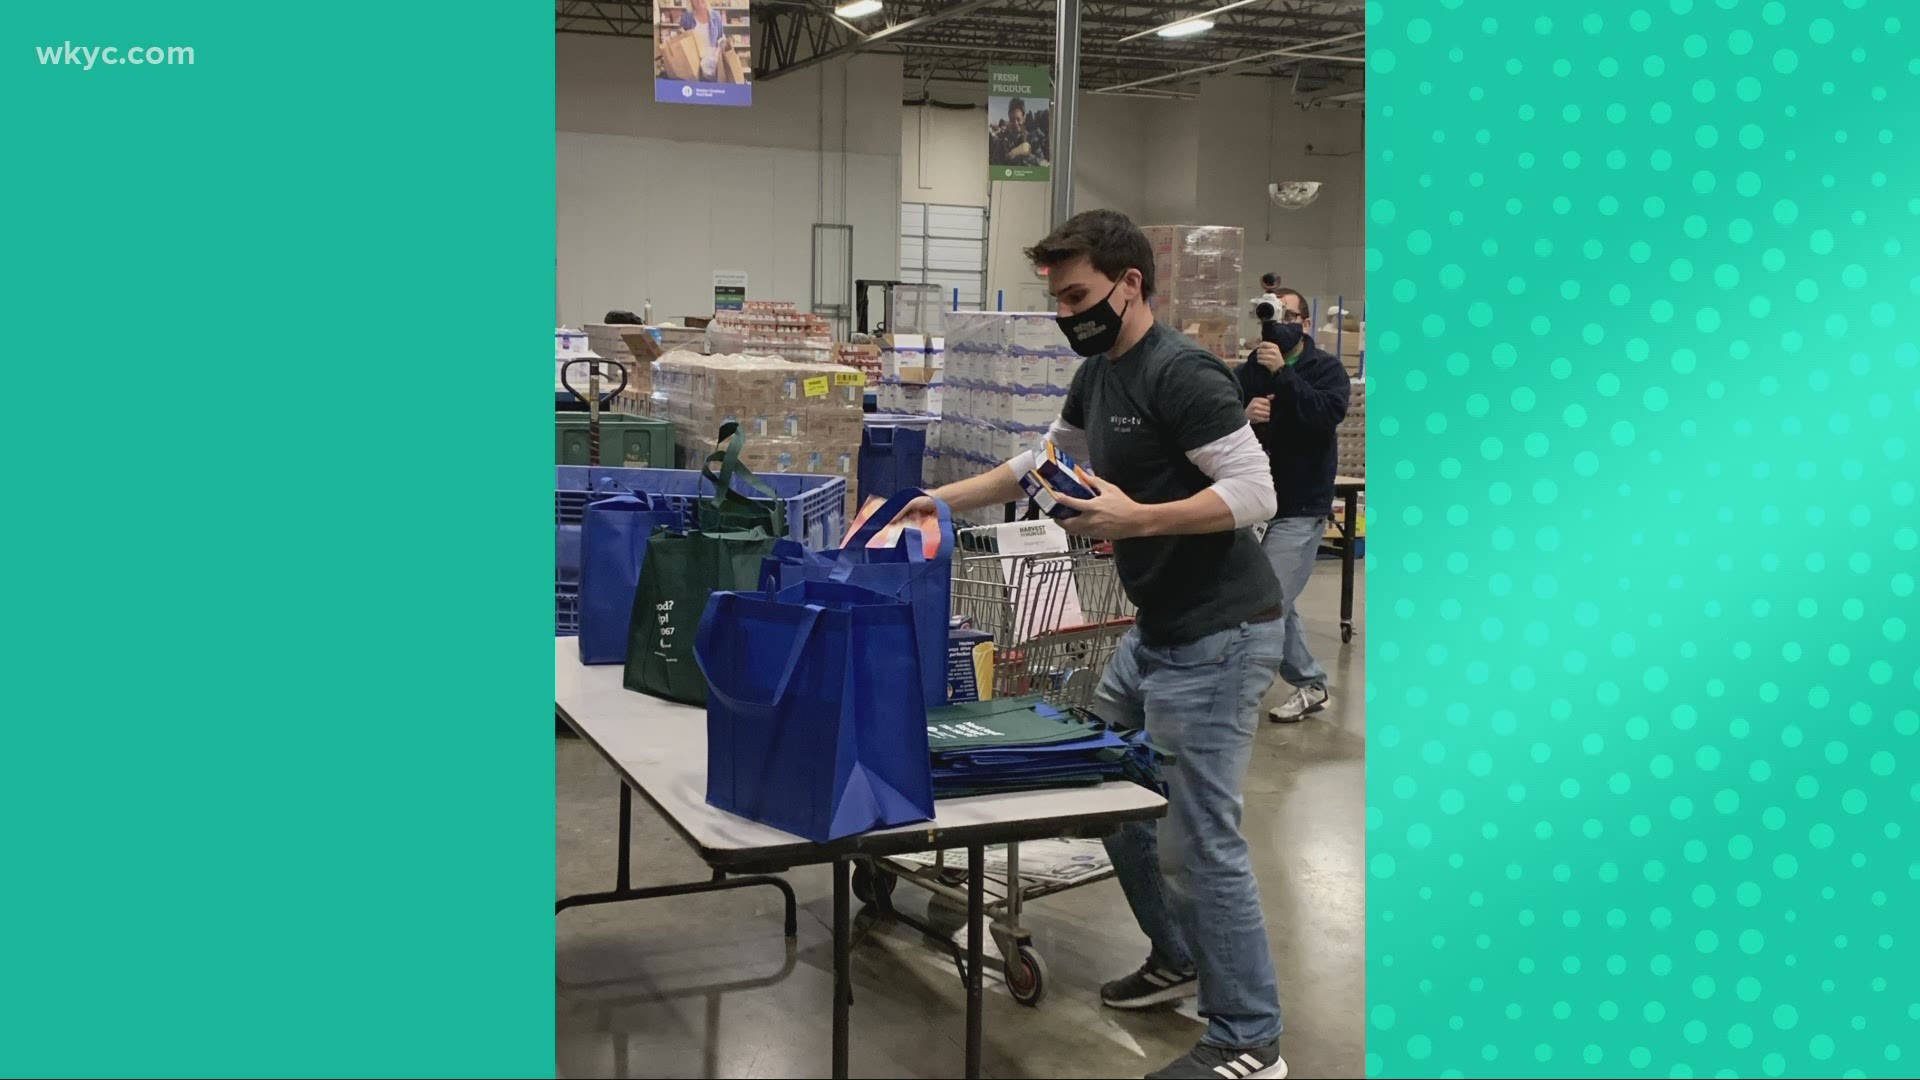 Feb. 17, 2021: The annual supermarket challenge at the Akron-Canton Regional Foodbank had a familiar face competing this year: 3News' Matt Standridge.